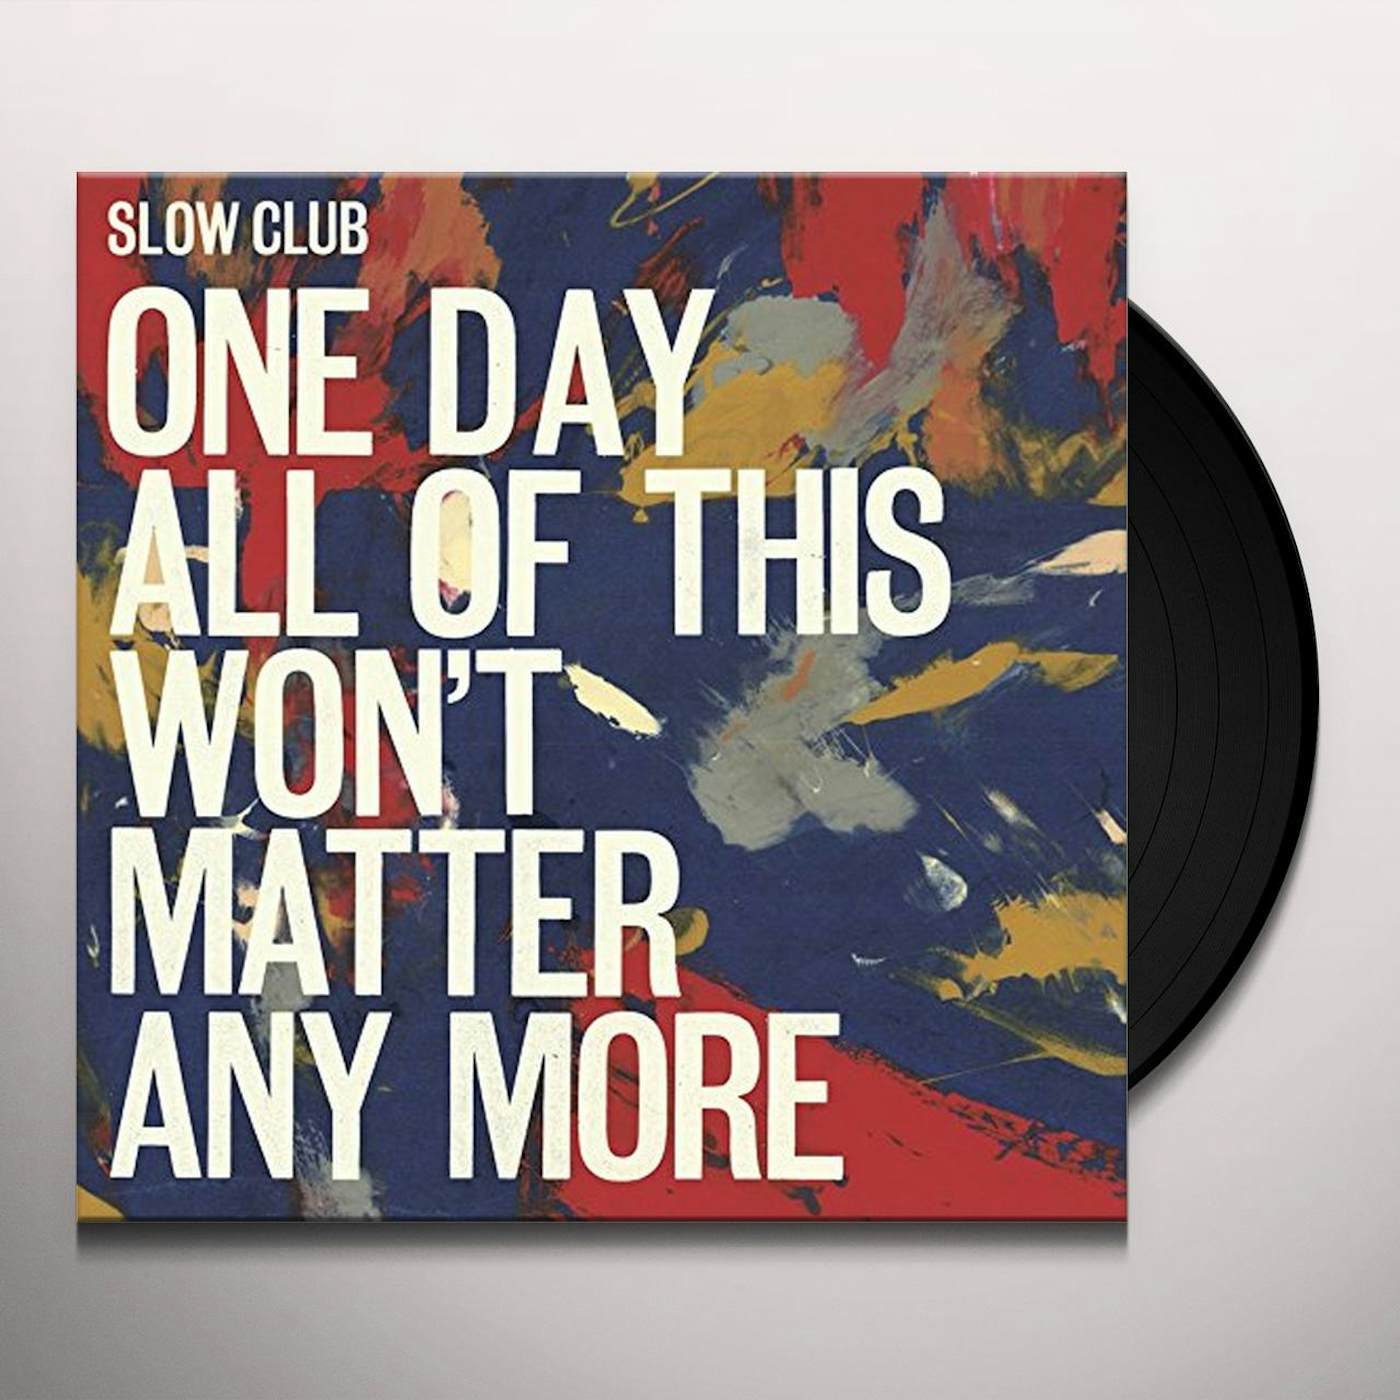 Slow Club One Day All of This Won't Matter Any More Vinyl Record